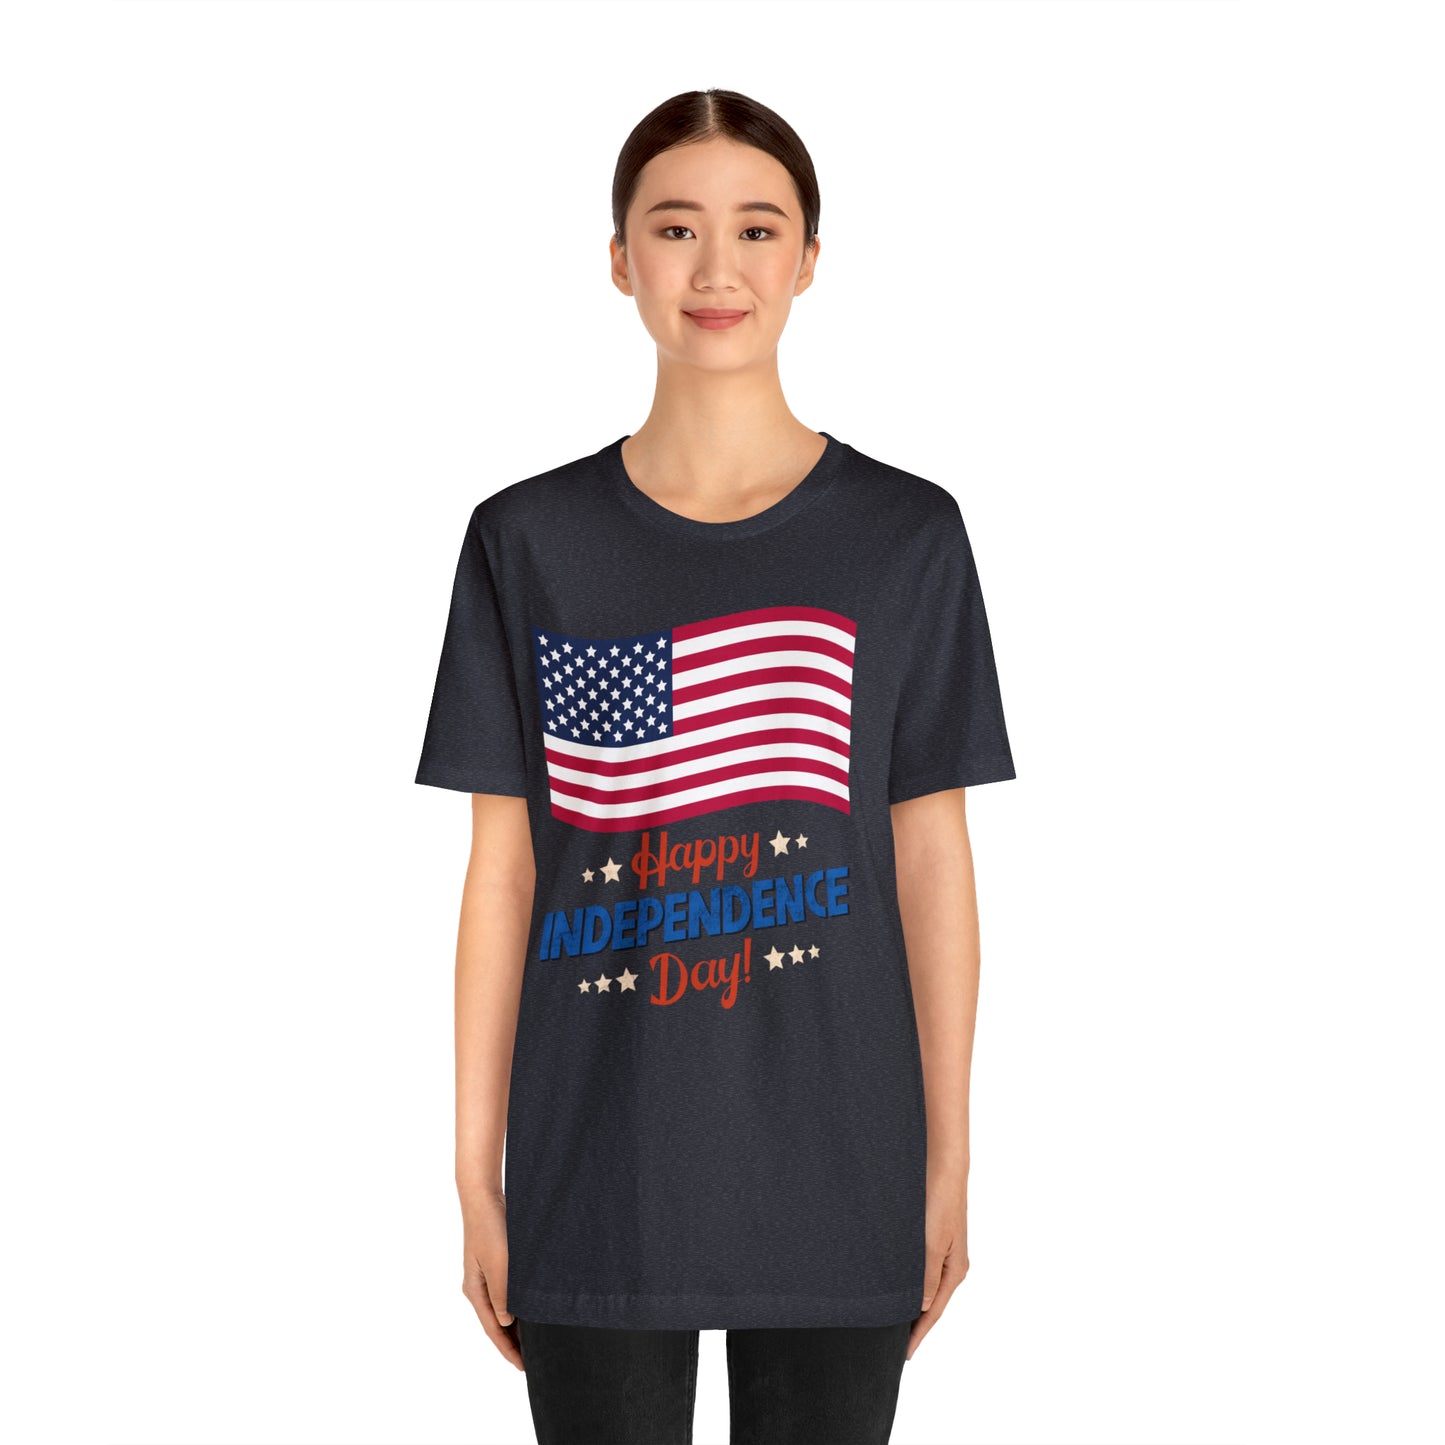 Independence Day shirt, American flag shirt, Red, white, and blue shirt, 4th of July clothing